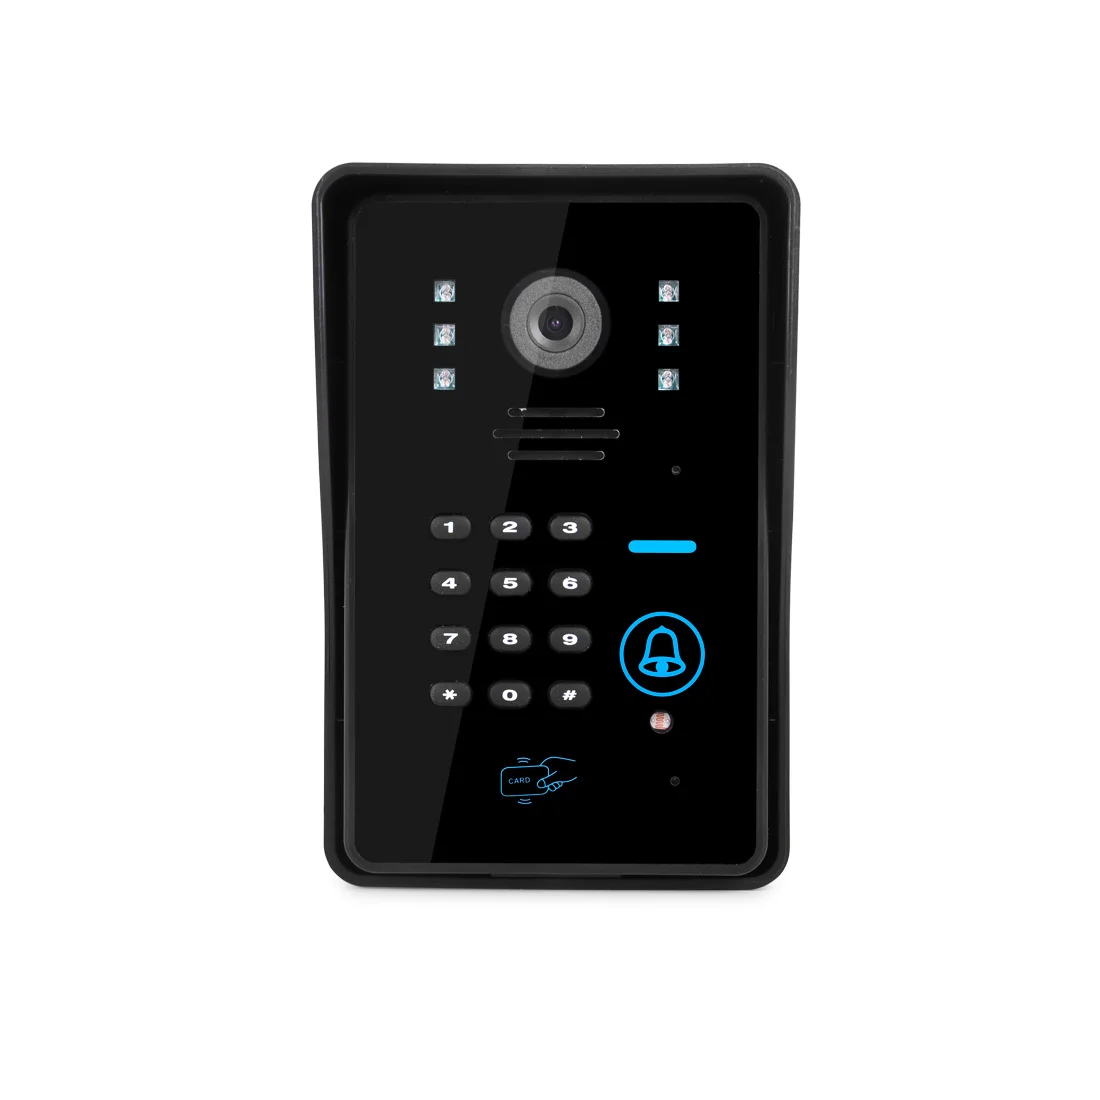 SYSD WiFi IP Camera Video Doorbell 720P Camera Night Vision with RFID and Face Recognition unlock enlarge